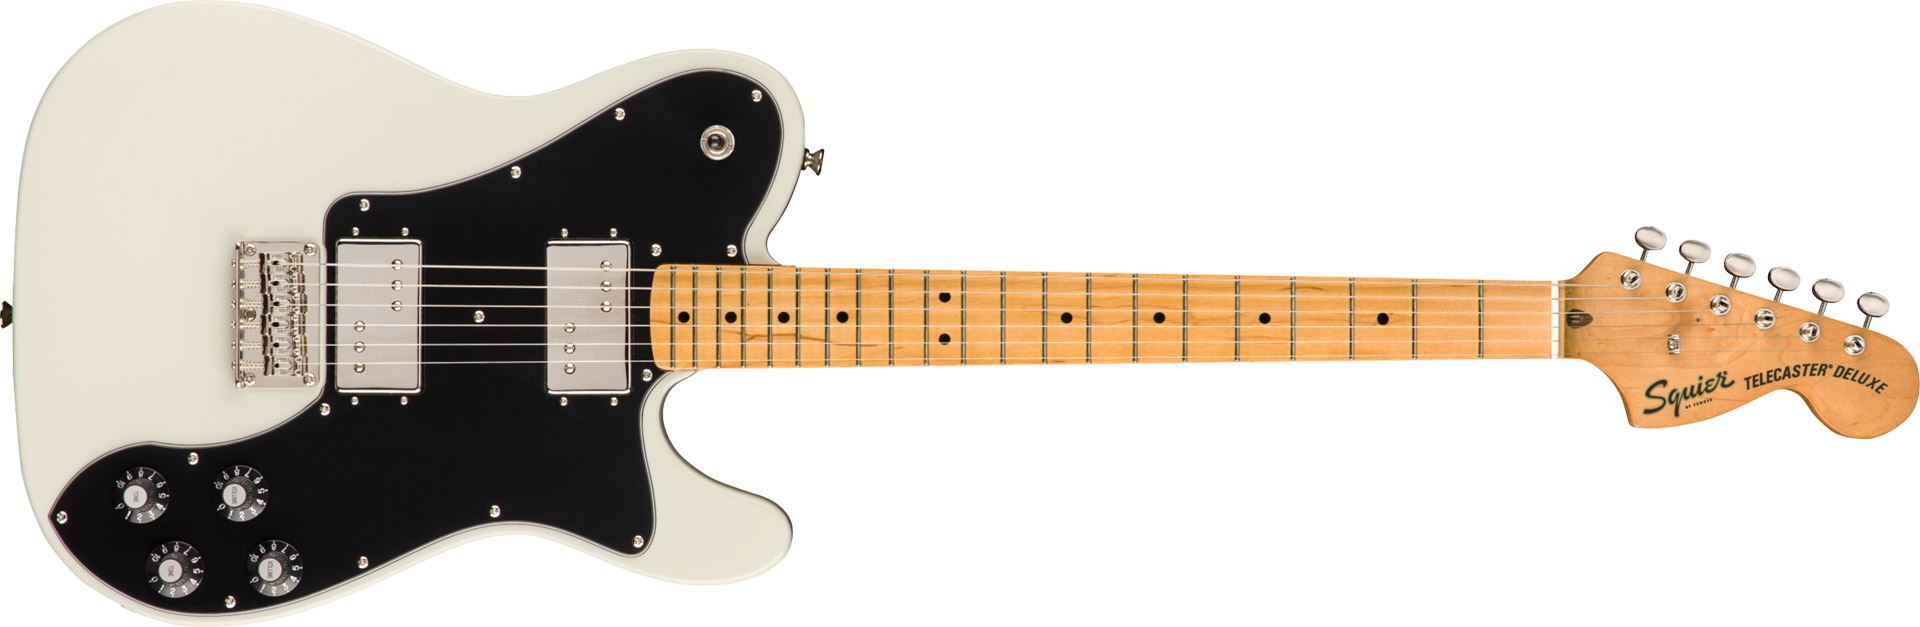 GUITARRA FENDER SQUIER CLASSIC VIBE 70S TELECASTER DELUXE MN - 037-4060-505 - OLYMPIC WHITE